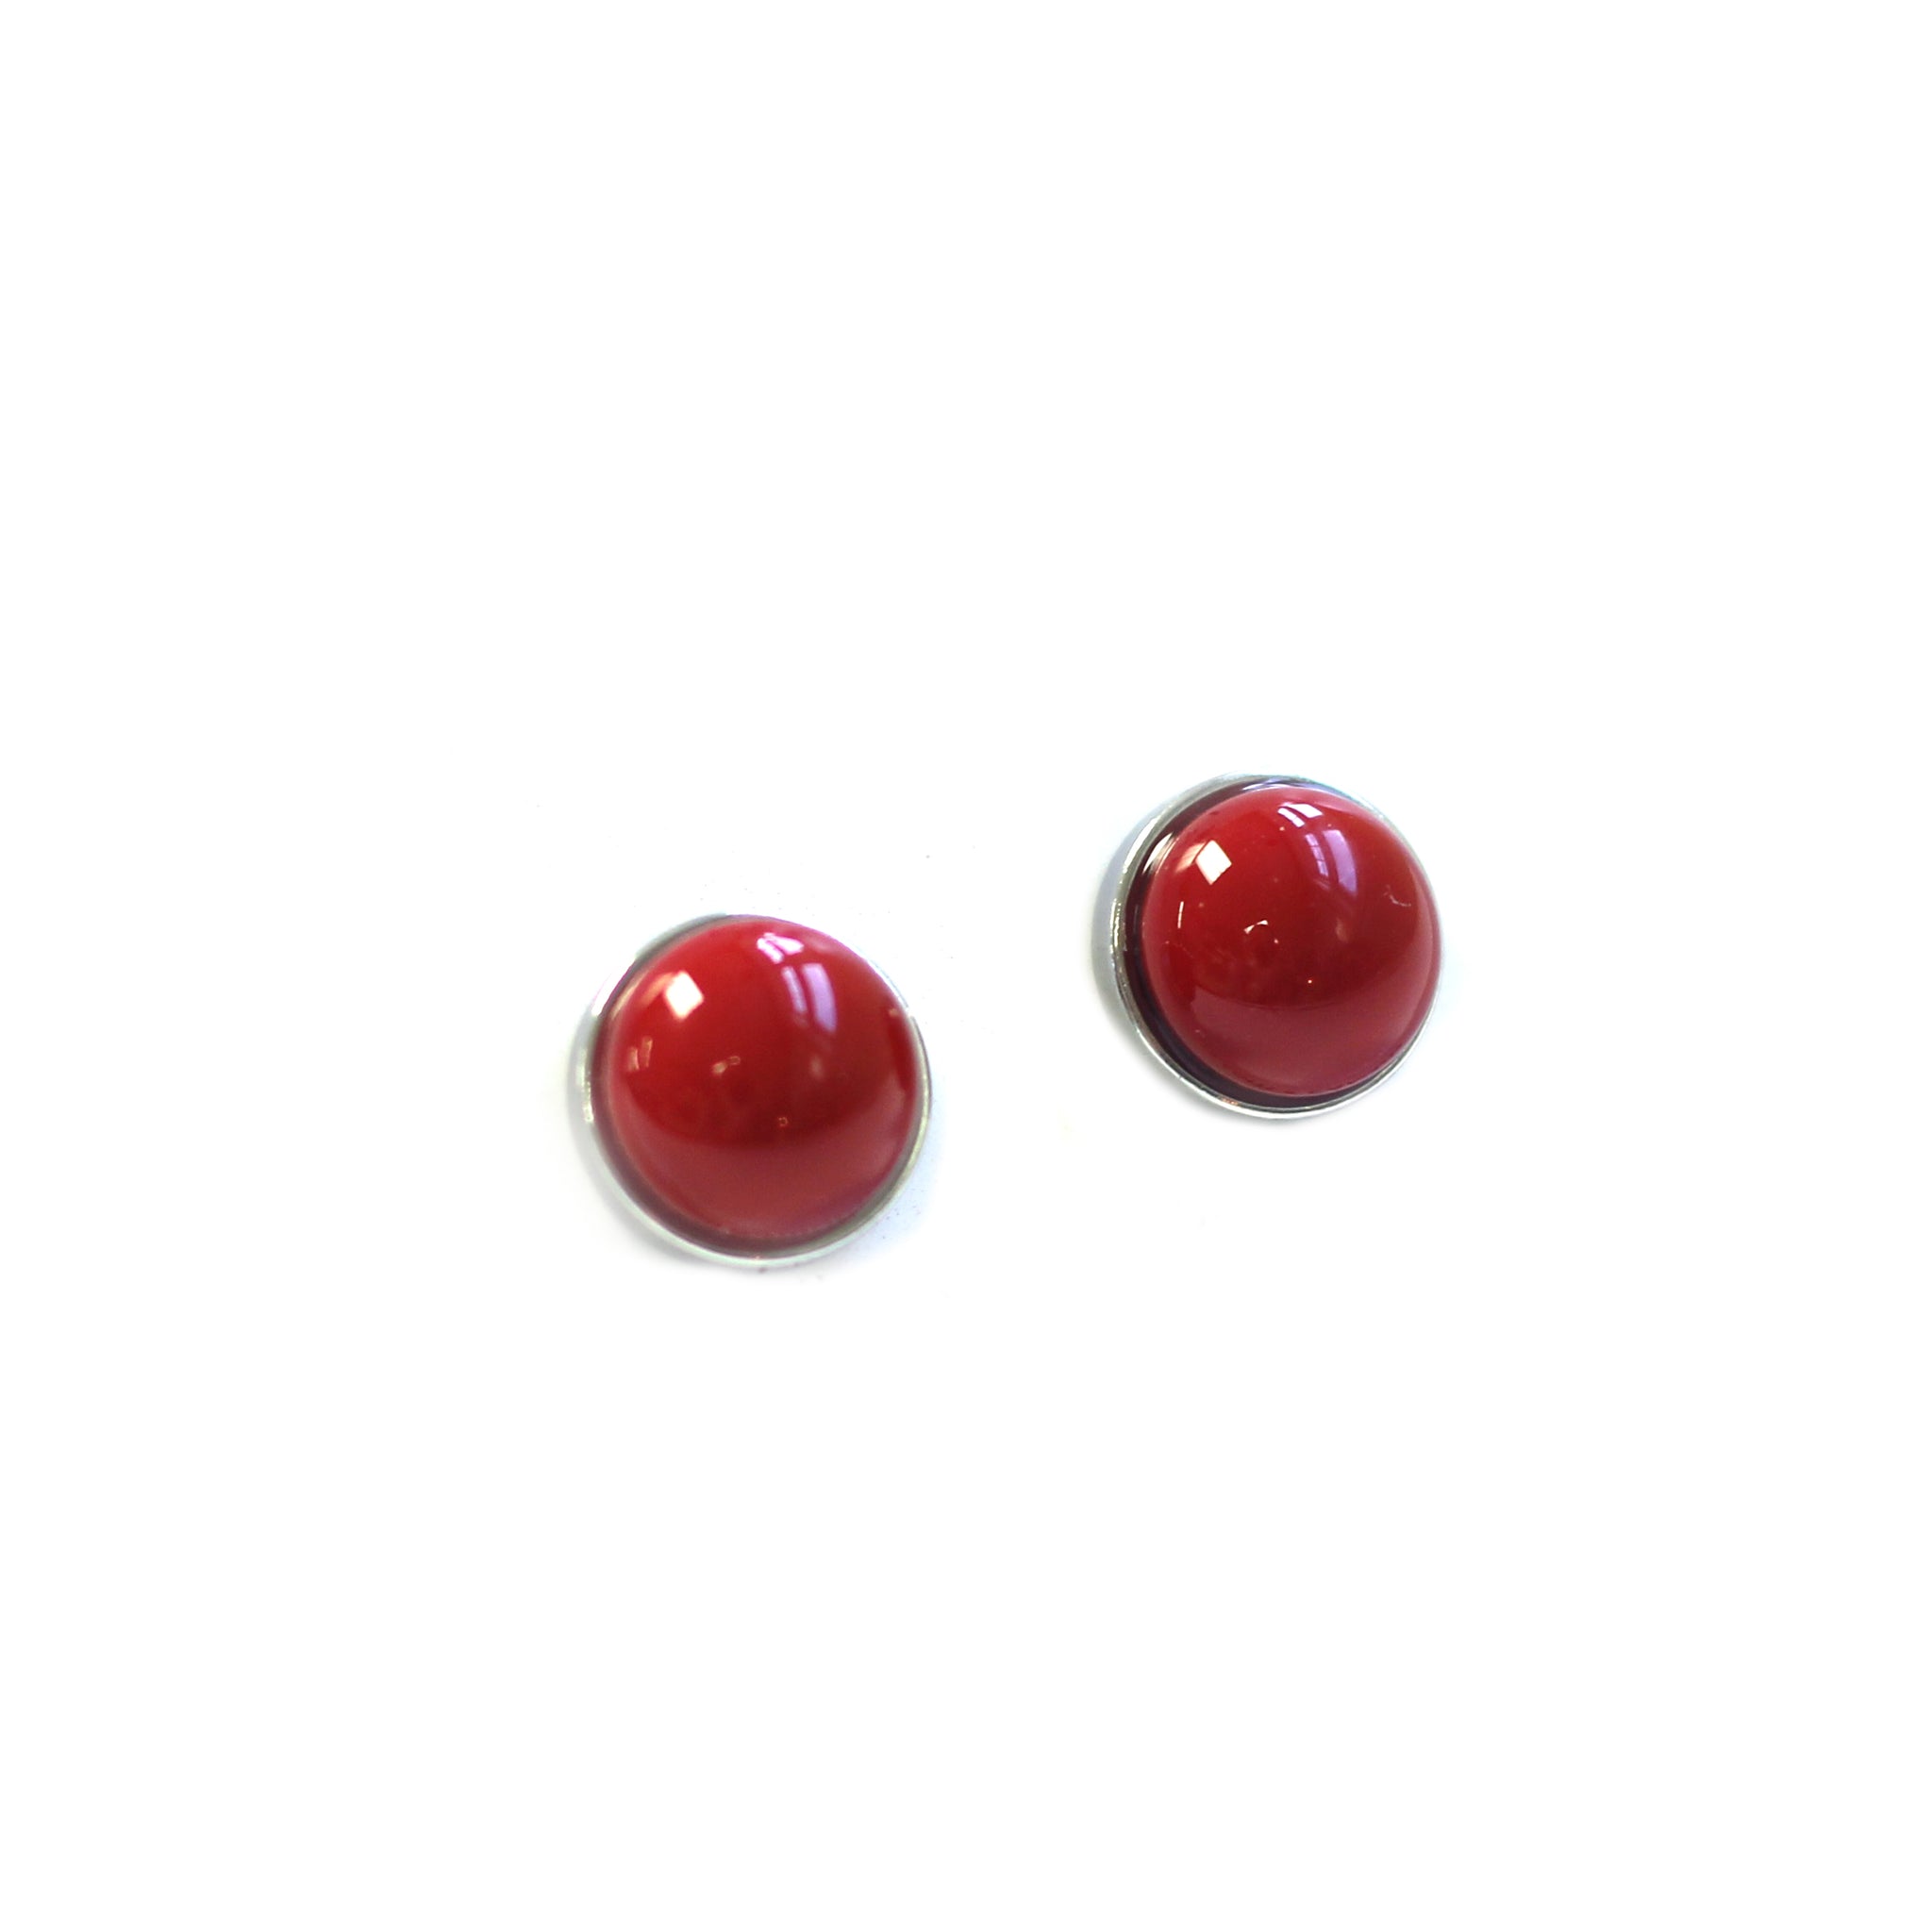 BOUCLE D'OREILLES "STAINLESS" ROUGE